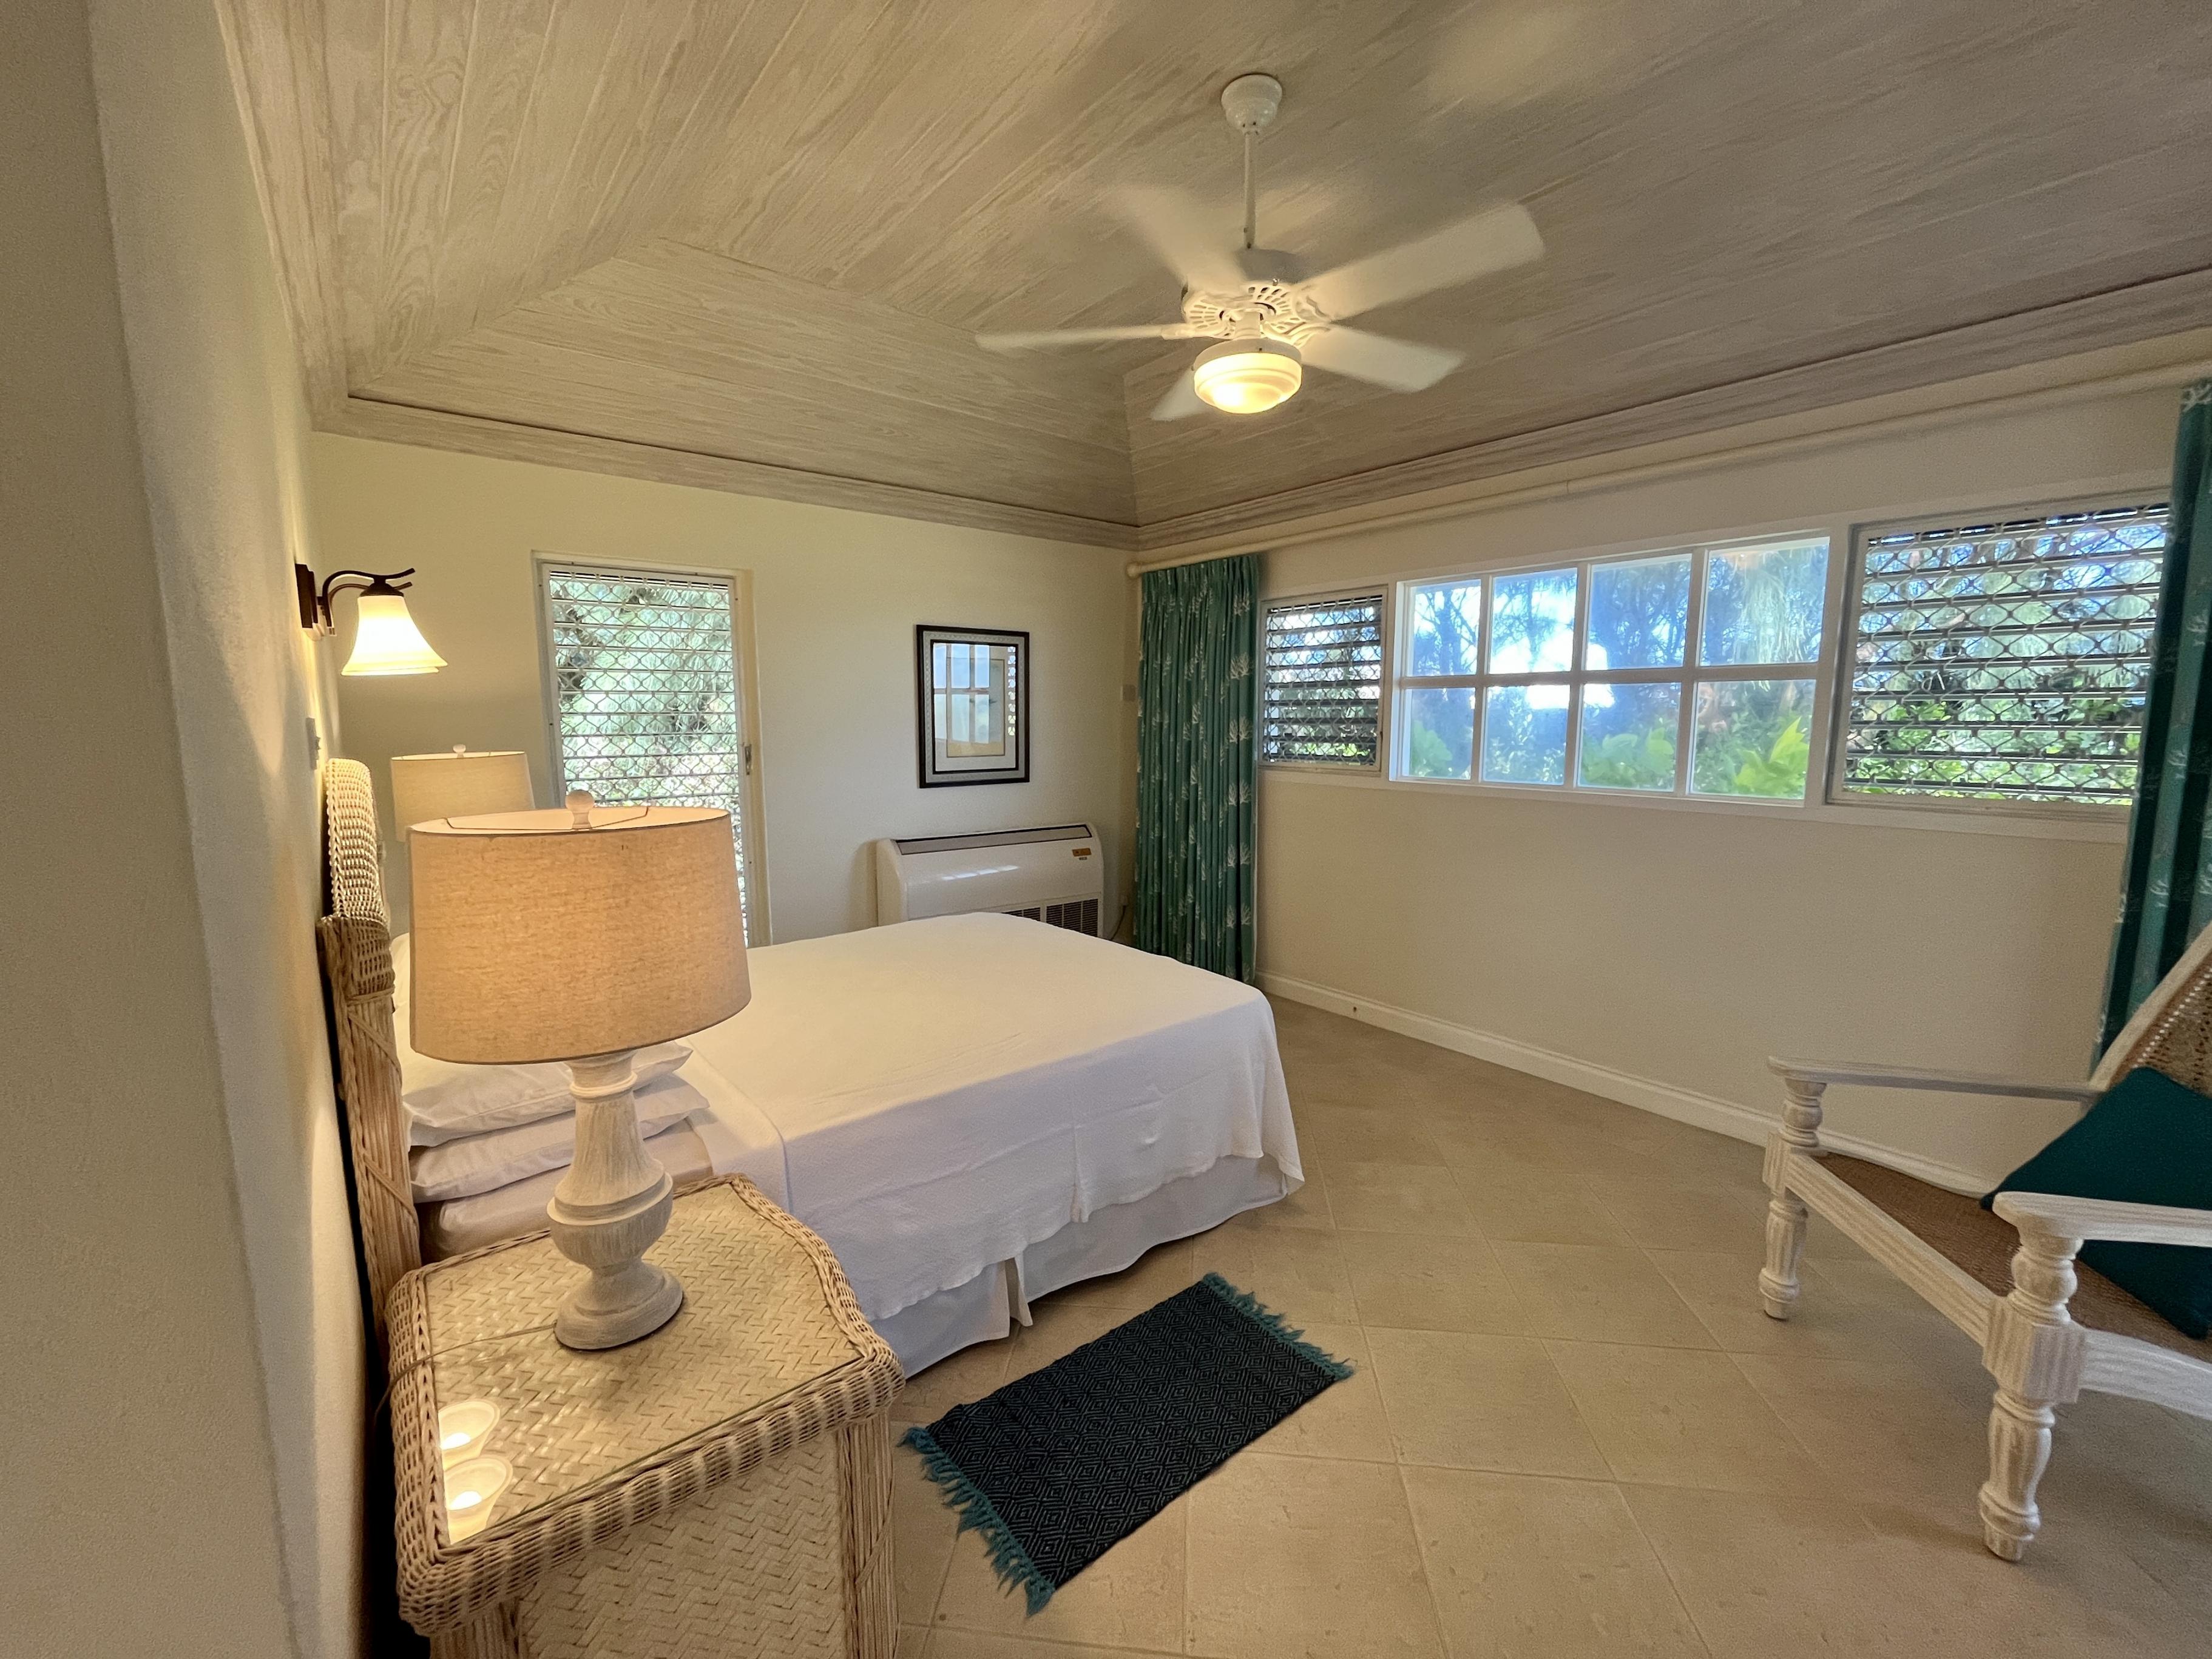 For Sale Paradise Point Long Bay St Philip Barbados House Villa Barbados Property For Sale